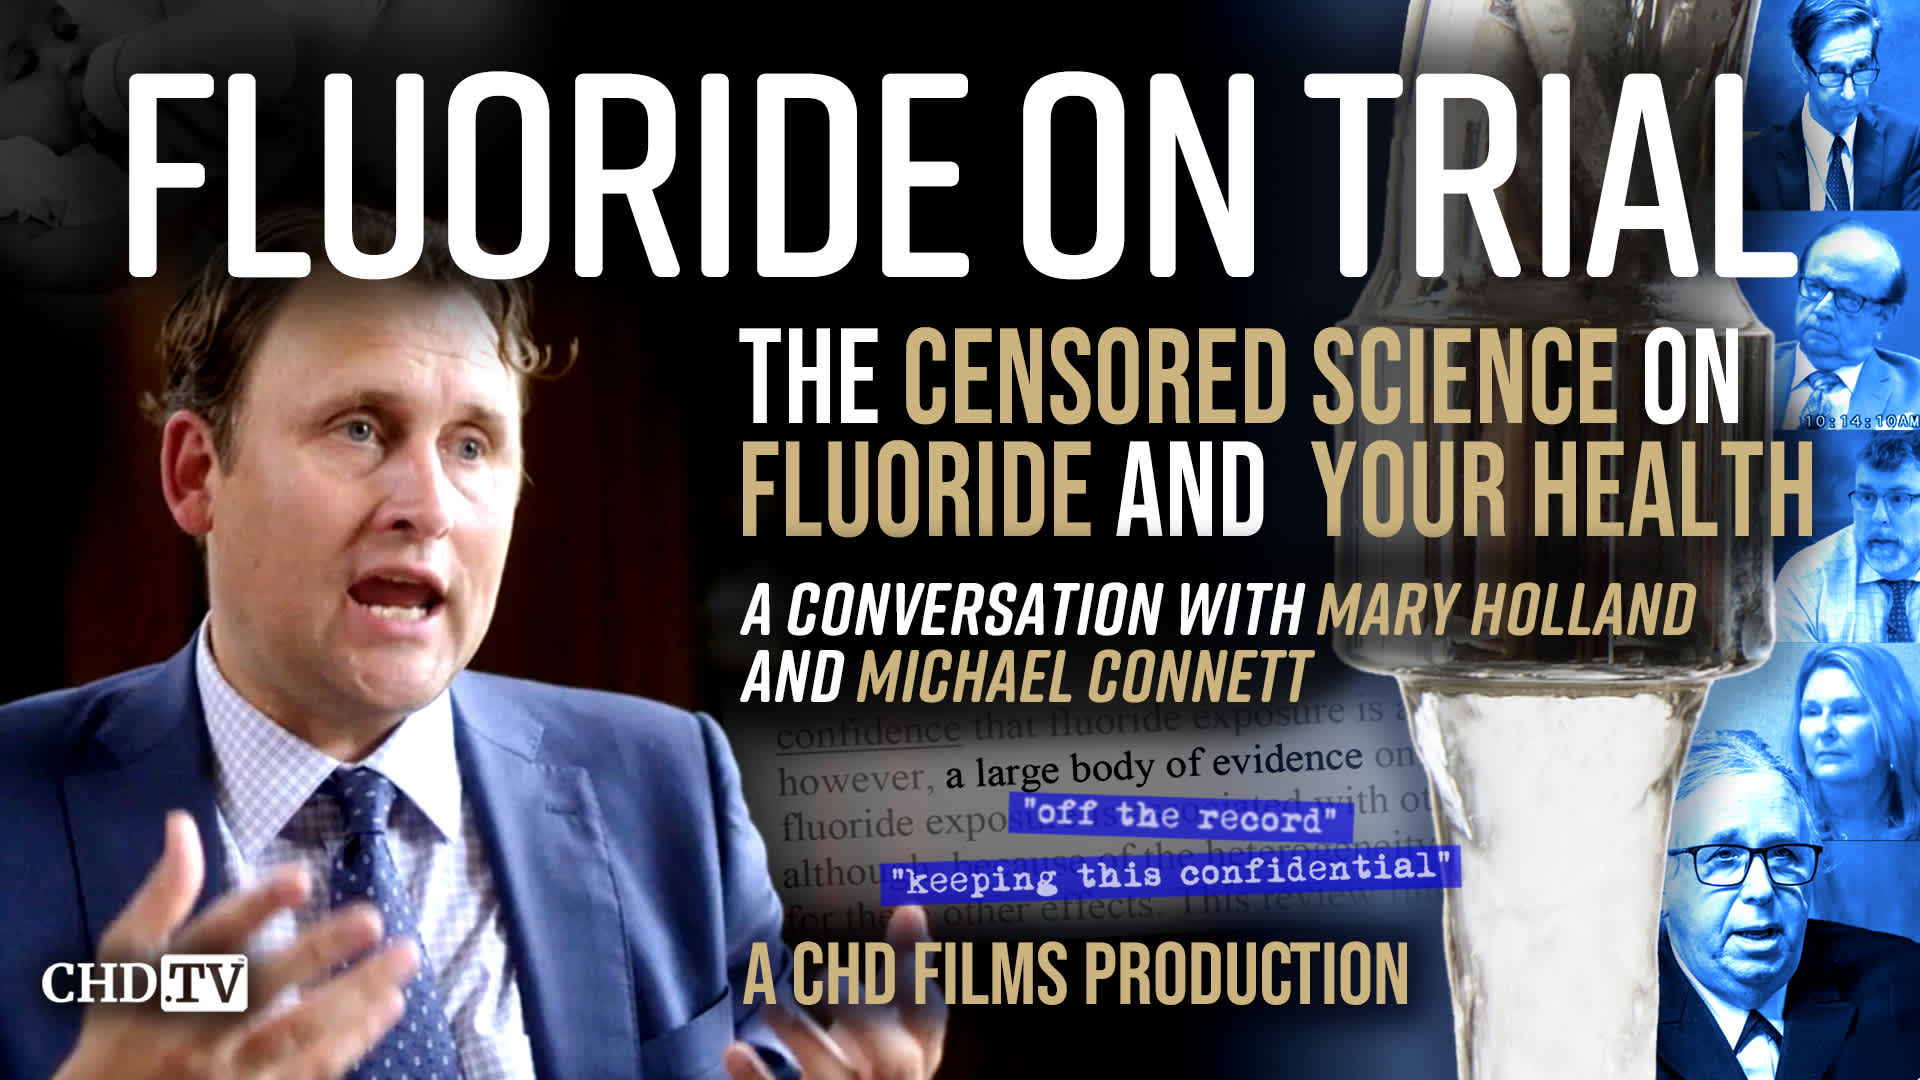 Fluoride On Trial: The Censored Science on Fluoride and Your Health